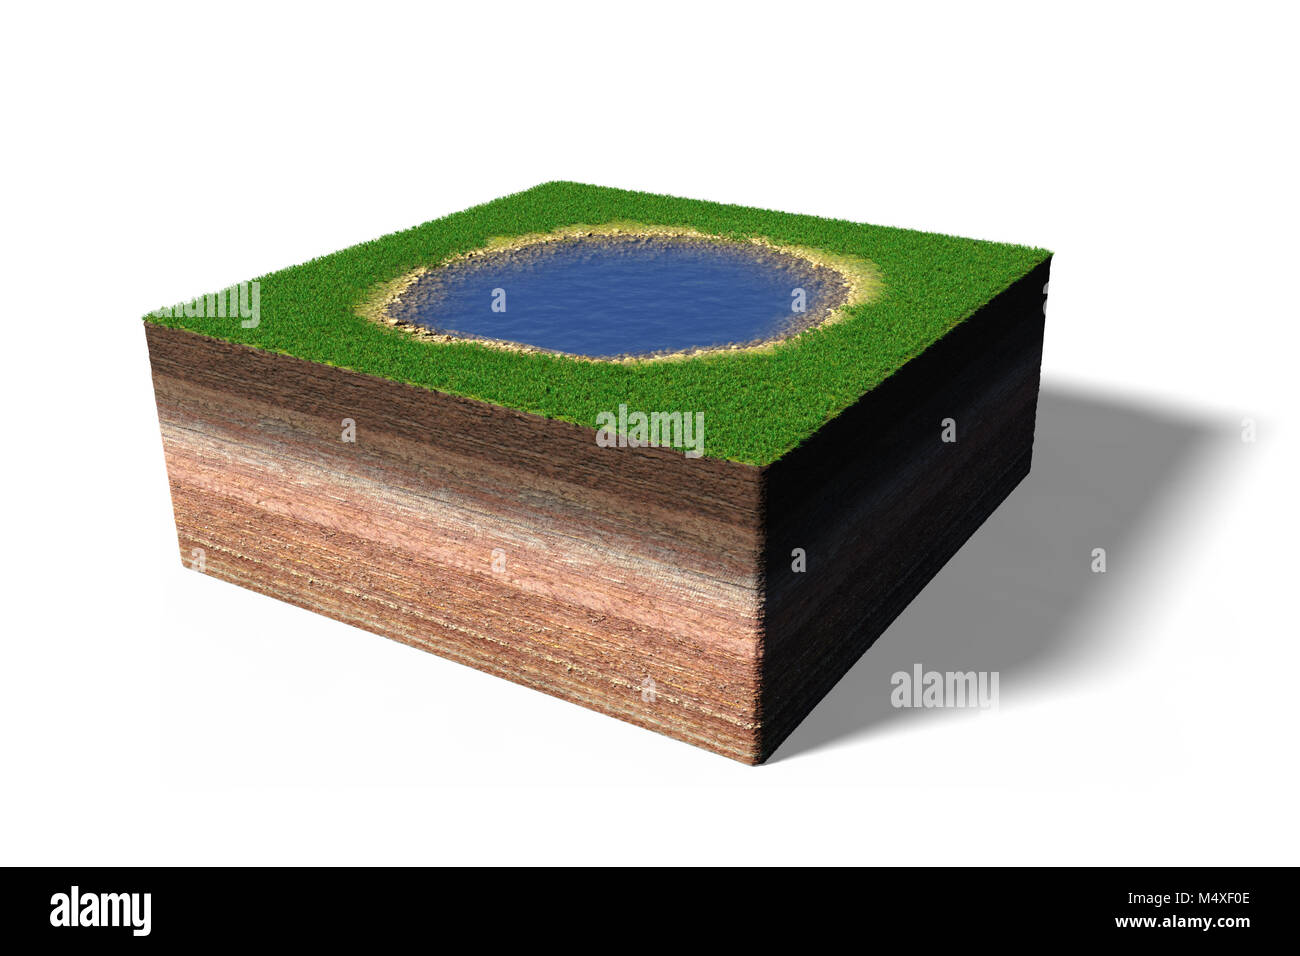 cross section of ground with small lake and grass, pond cube concept (3d illustration, isolated on white background) Stock Photo